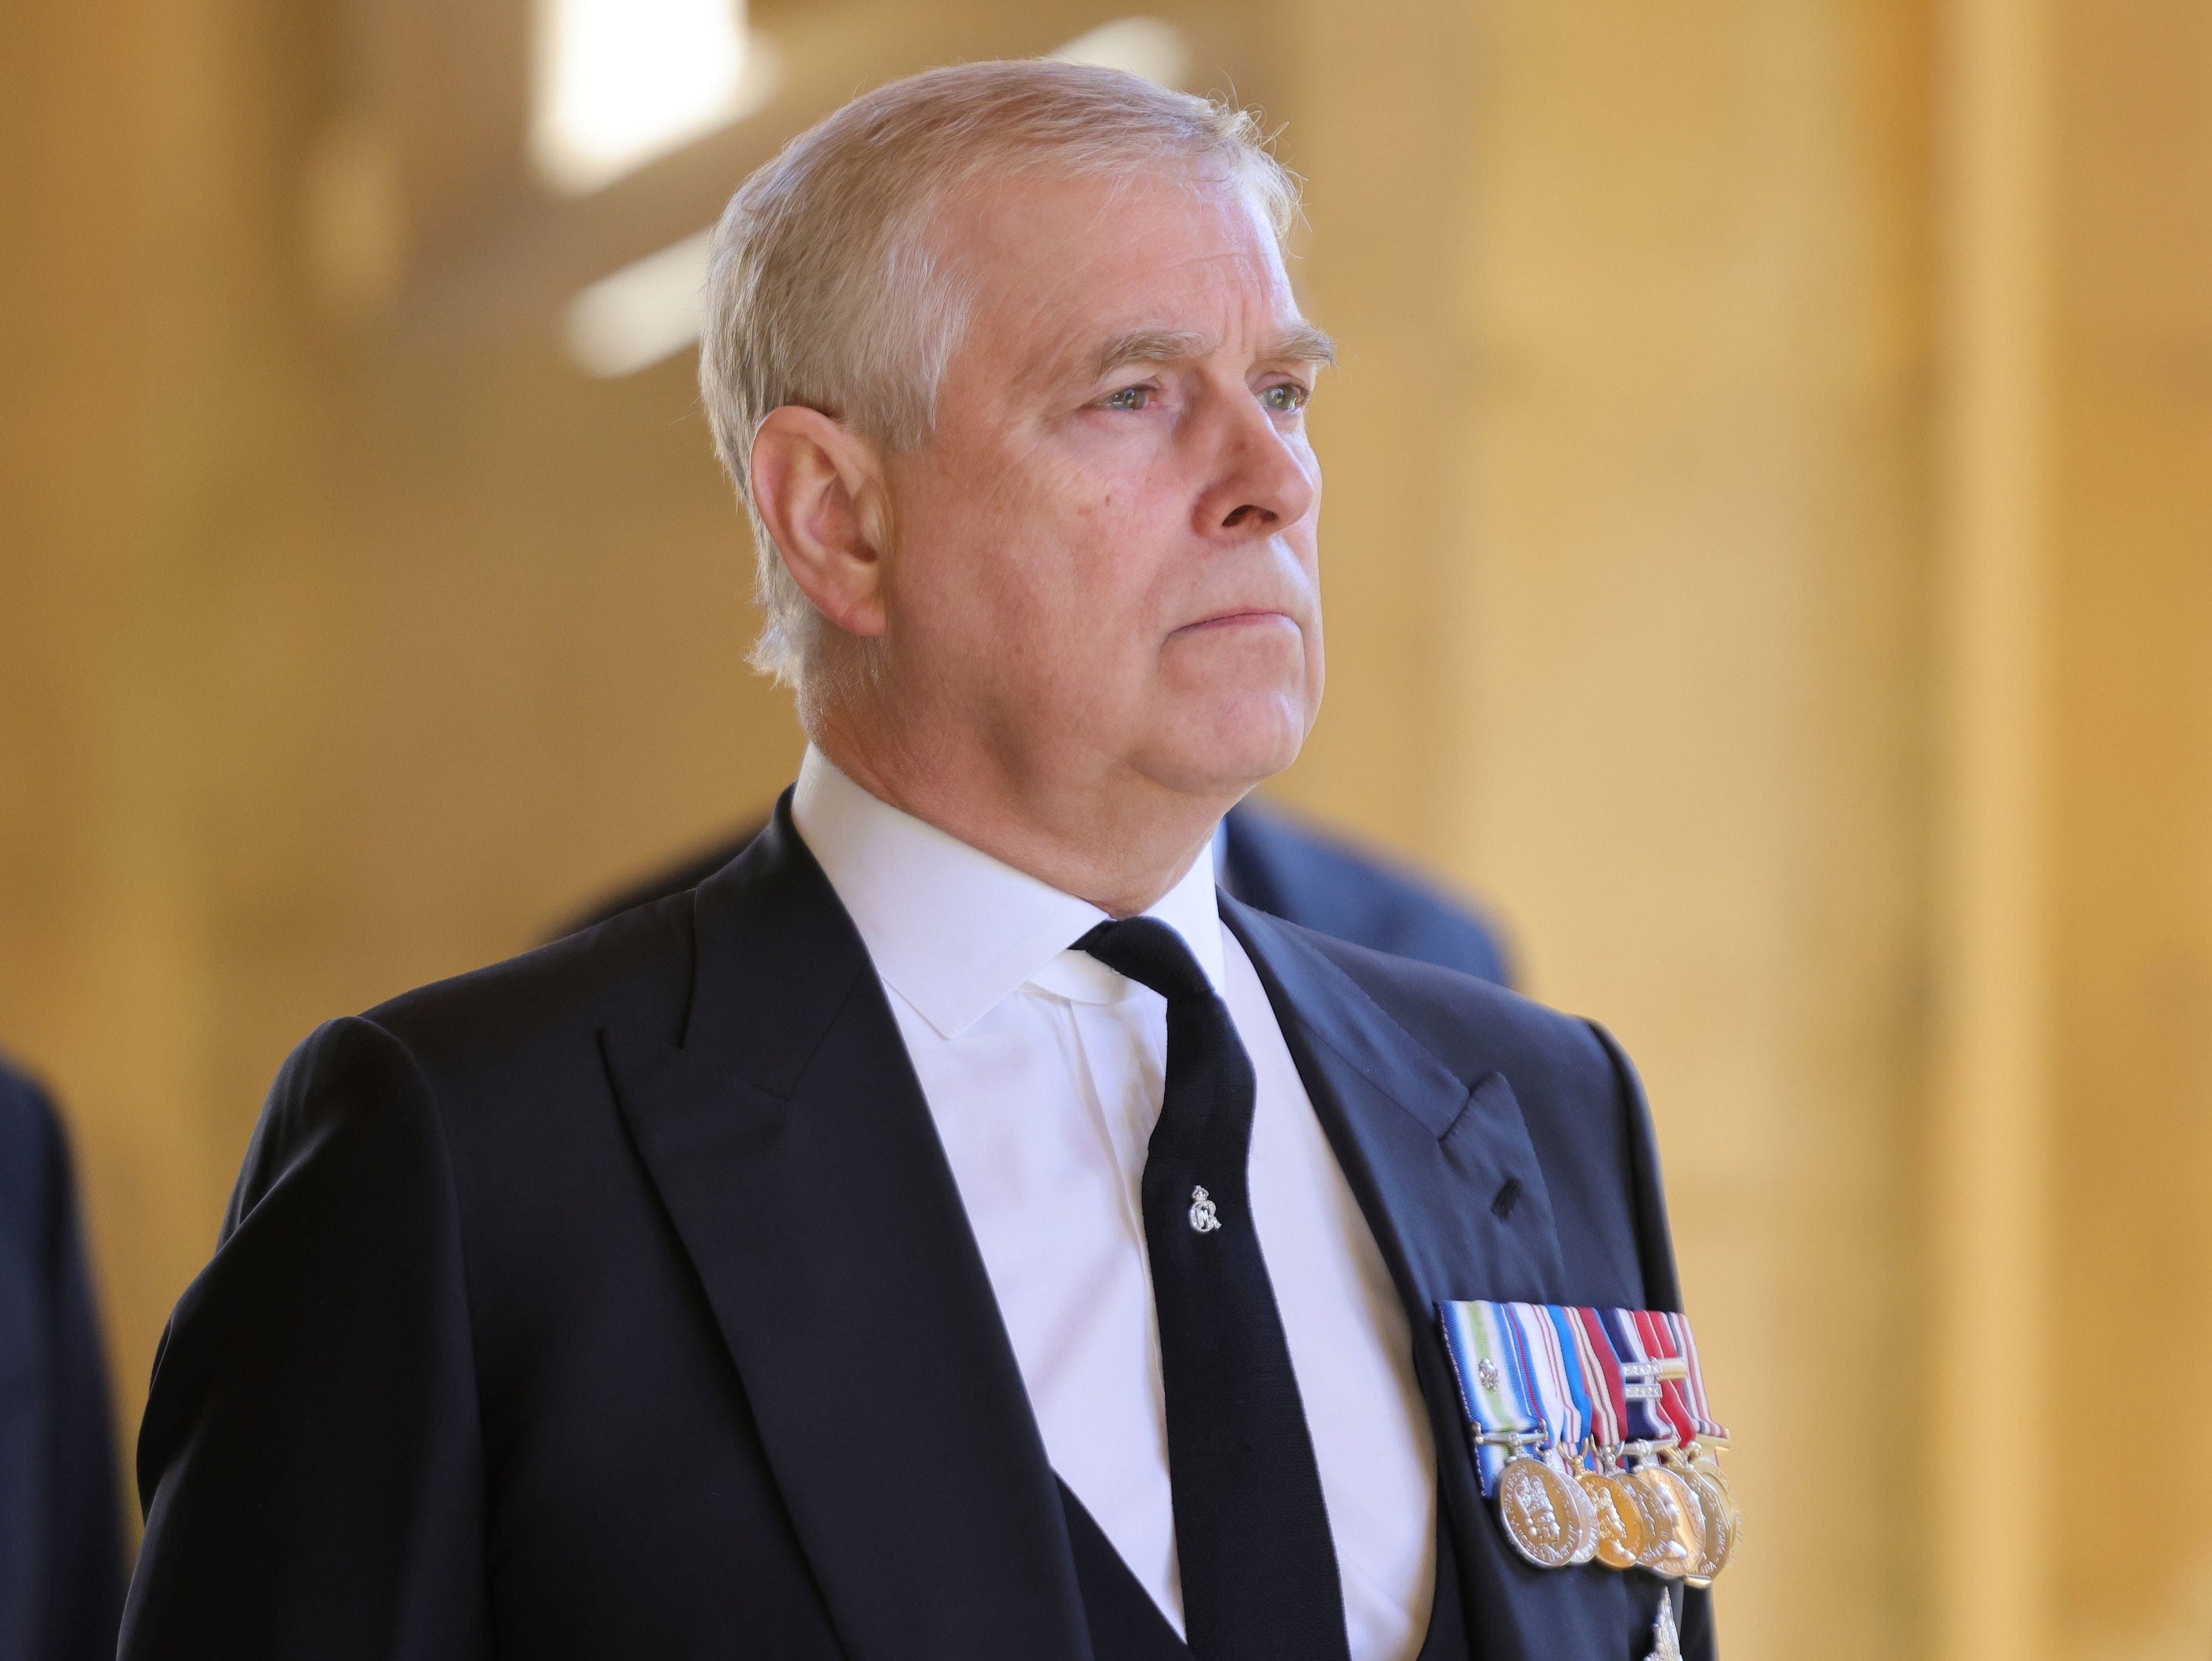 Prince Andrew stepped back from public duties in 2019 following an interview over his ties to billionaire paedophile Jeffrey Epstein